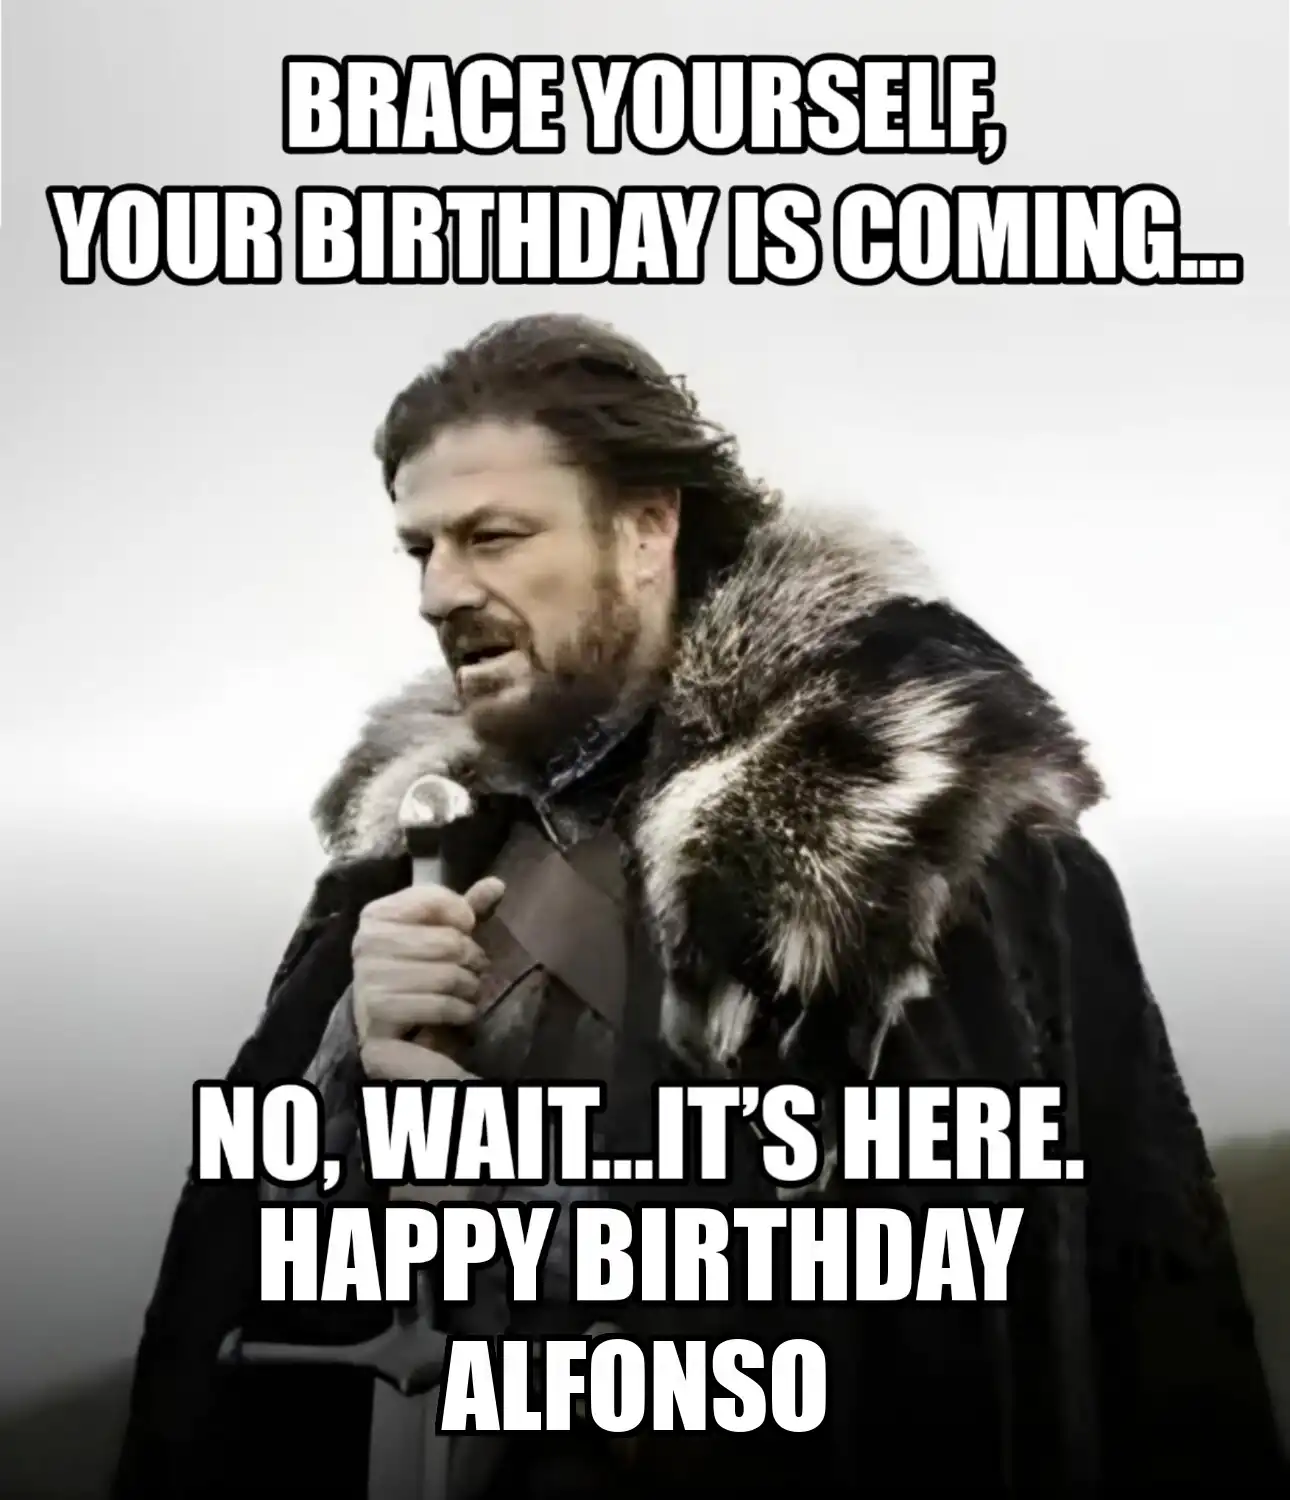 Happy Birthday Alfonso Brace Yourself Your Birthday Is Coming Meme